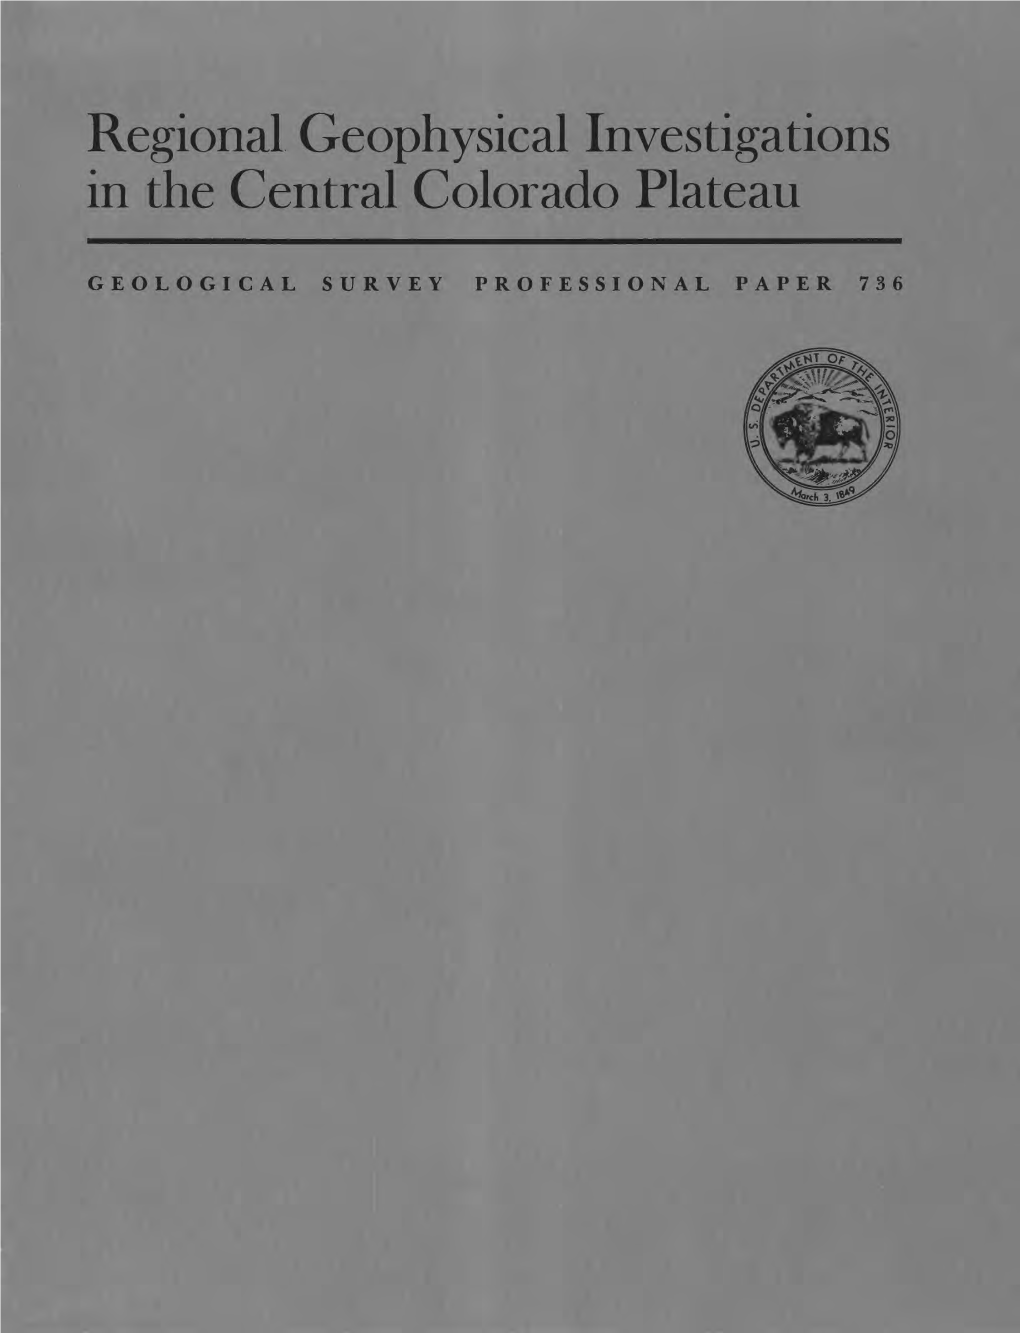 Regional Geophysical Investigations in the Central Colorado Plateau